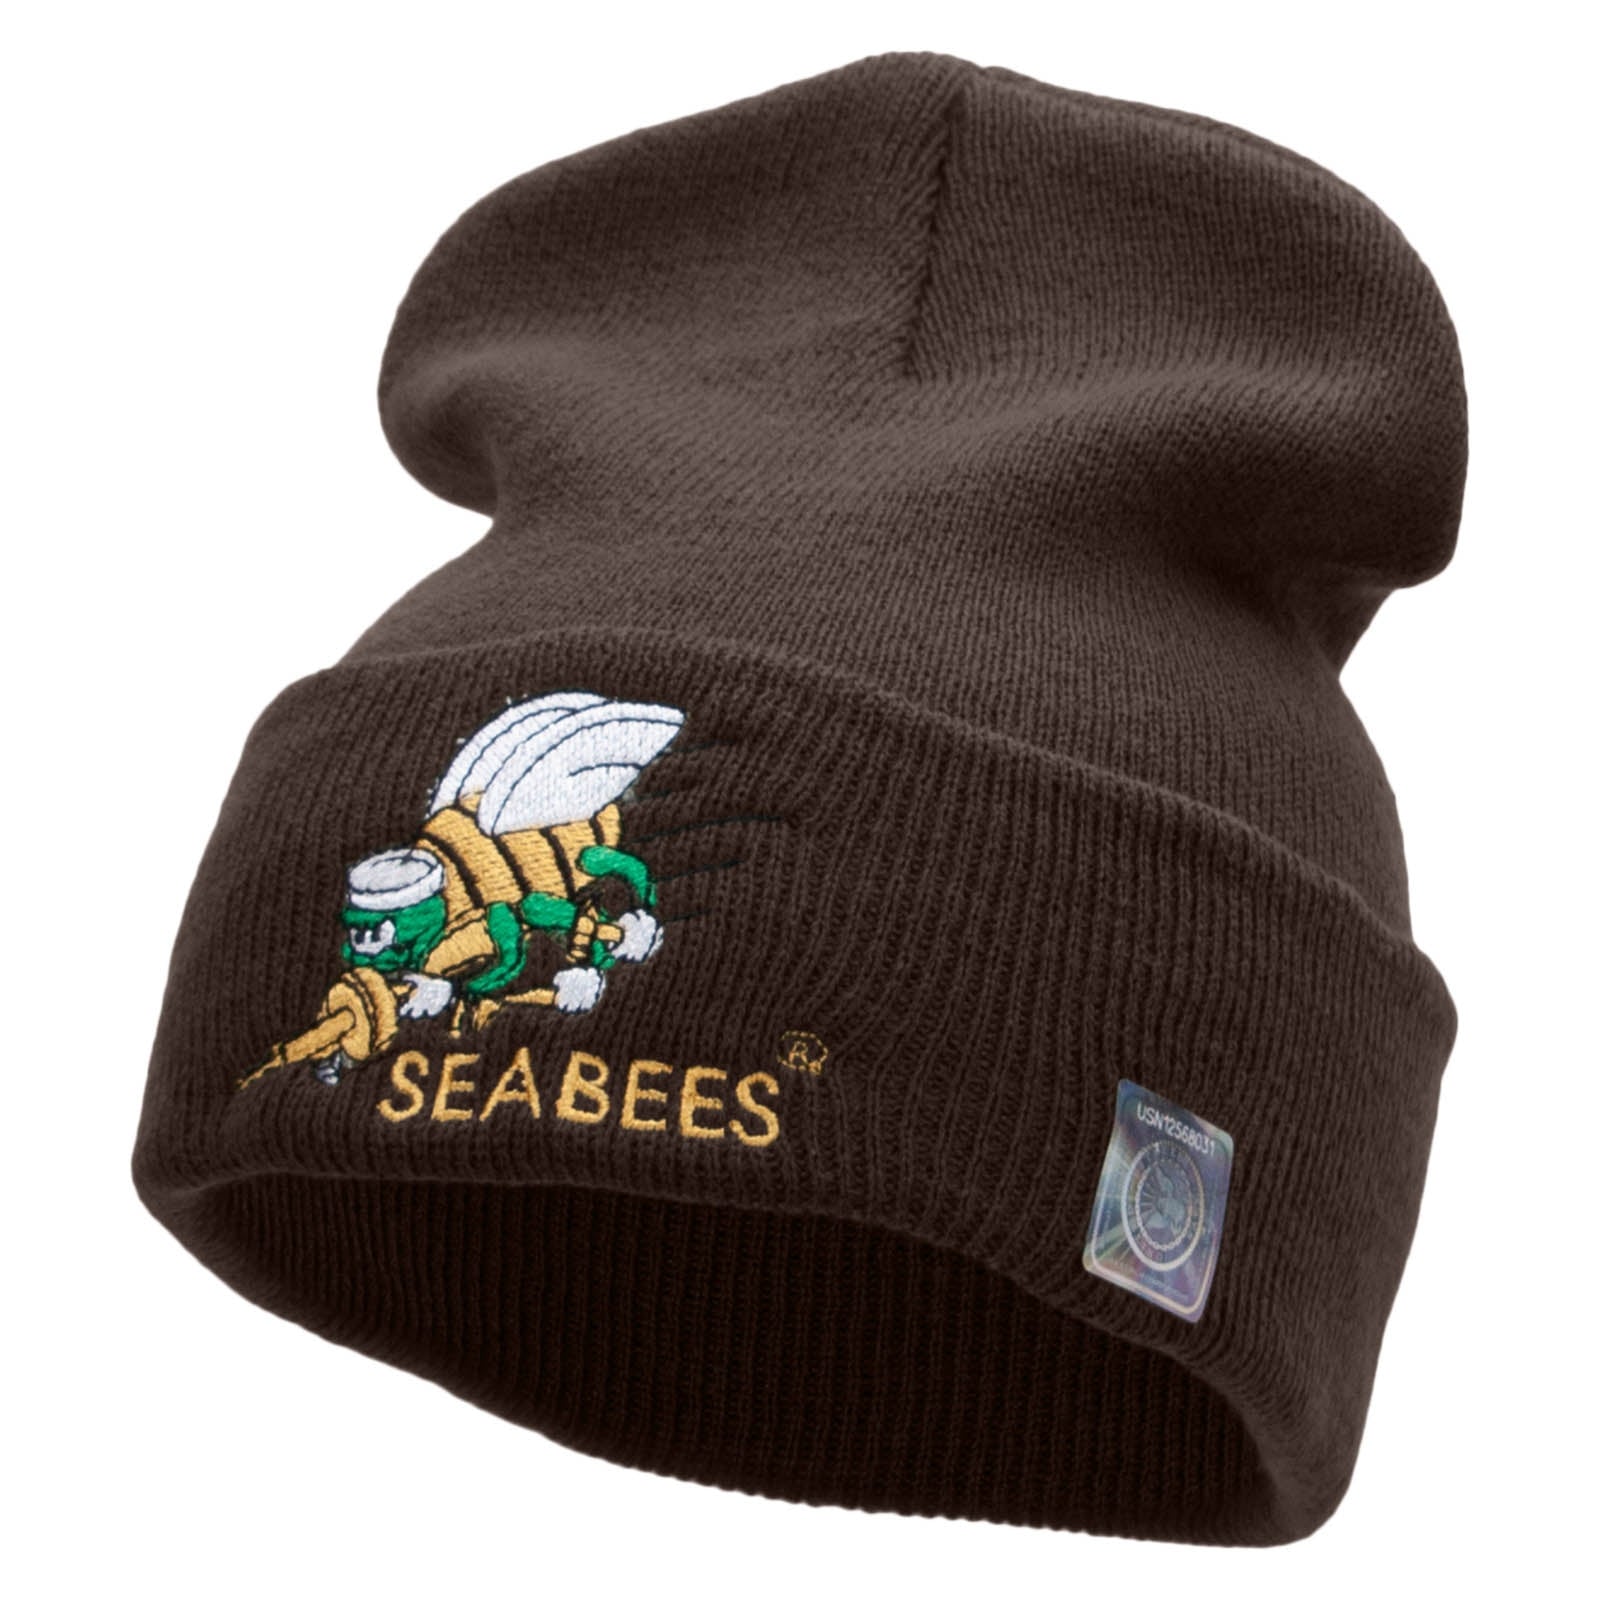 Licensed Navy Seabees Symbol Embroidered Cuff Long Beanie Made in USA - Brown OSFM